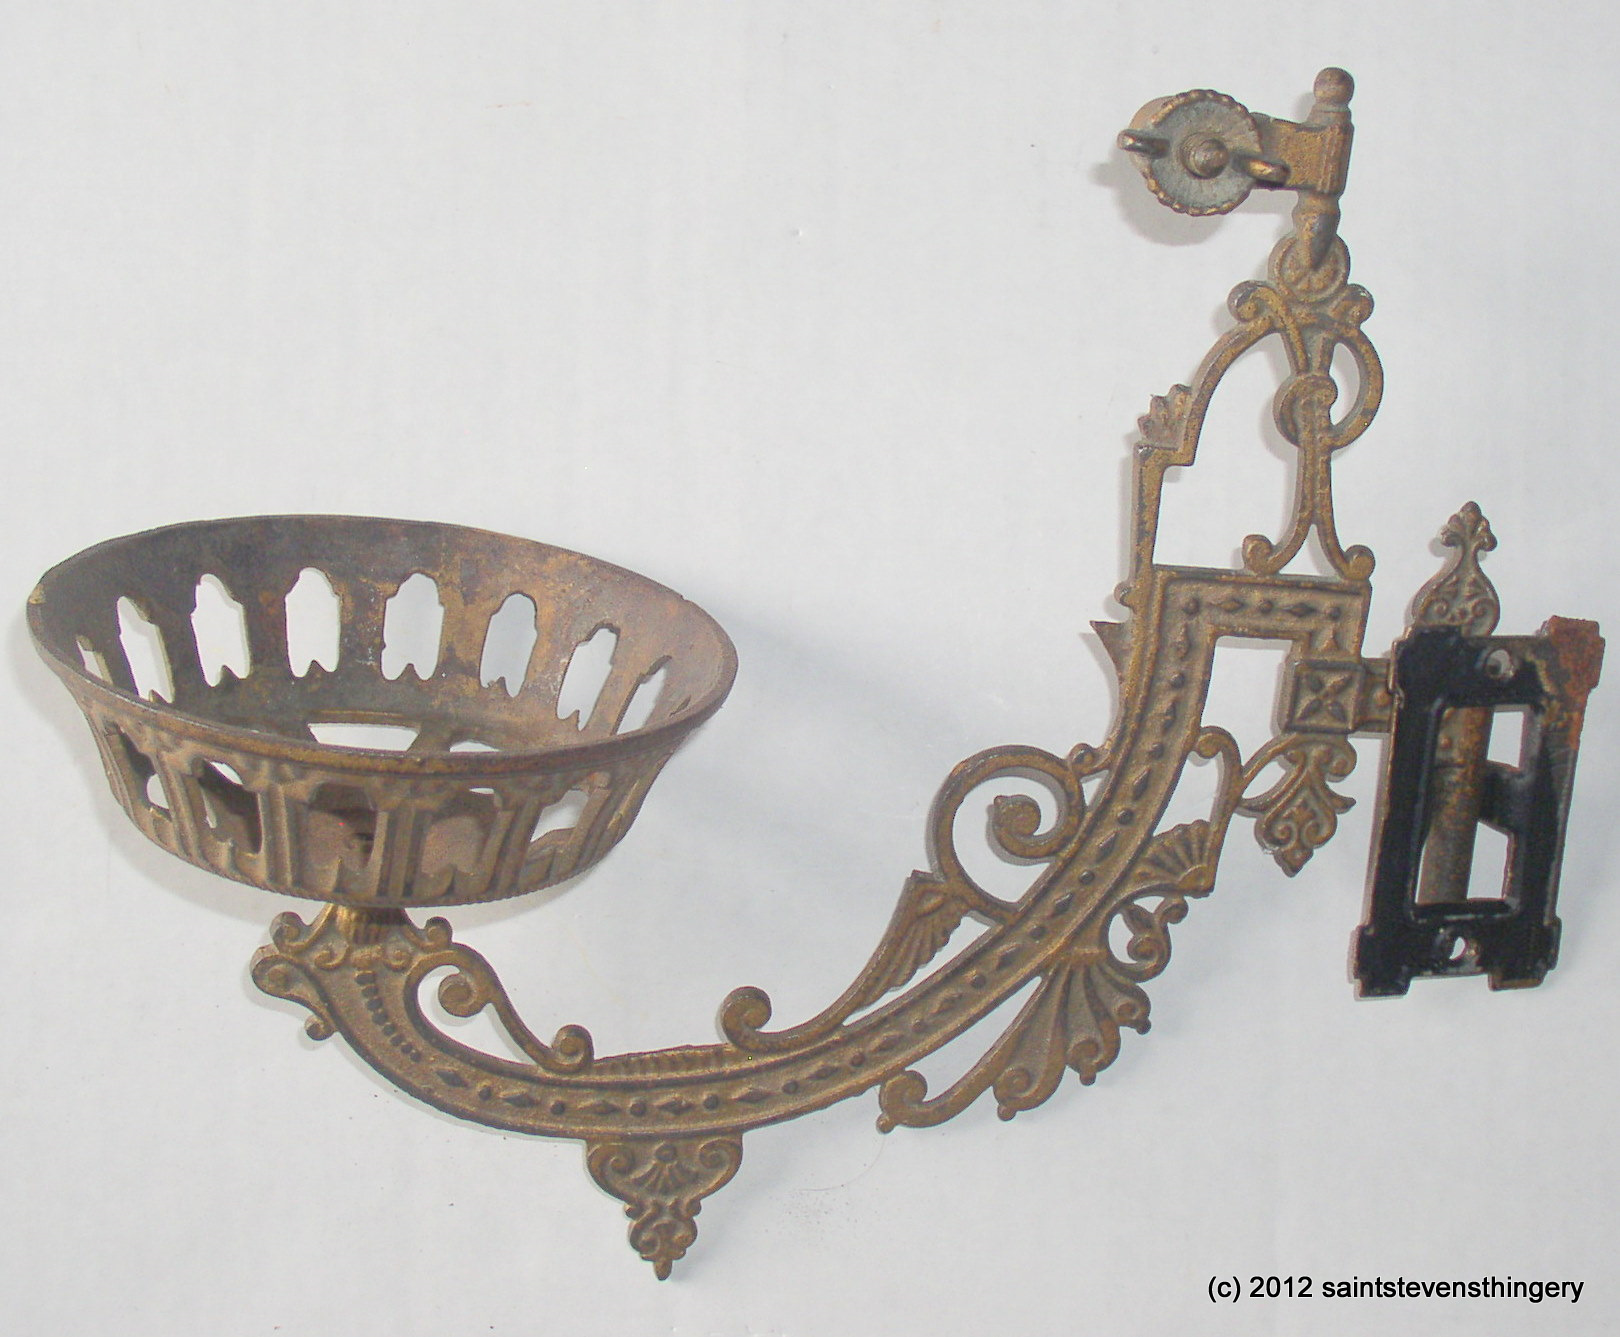 Details about   Antique Victorian Ornate Cast Iron Oil Lamp Holder Fitter Sconce Swivel Arm 7" 